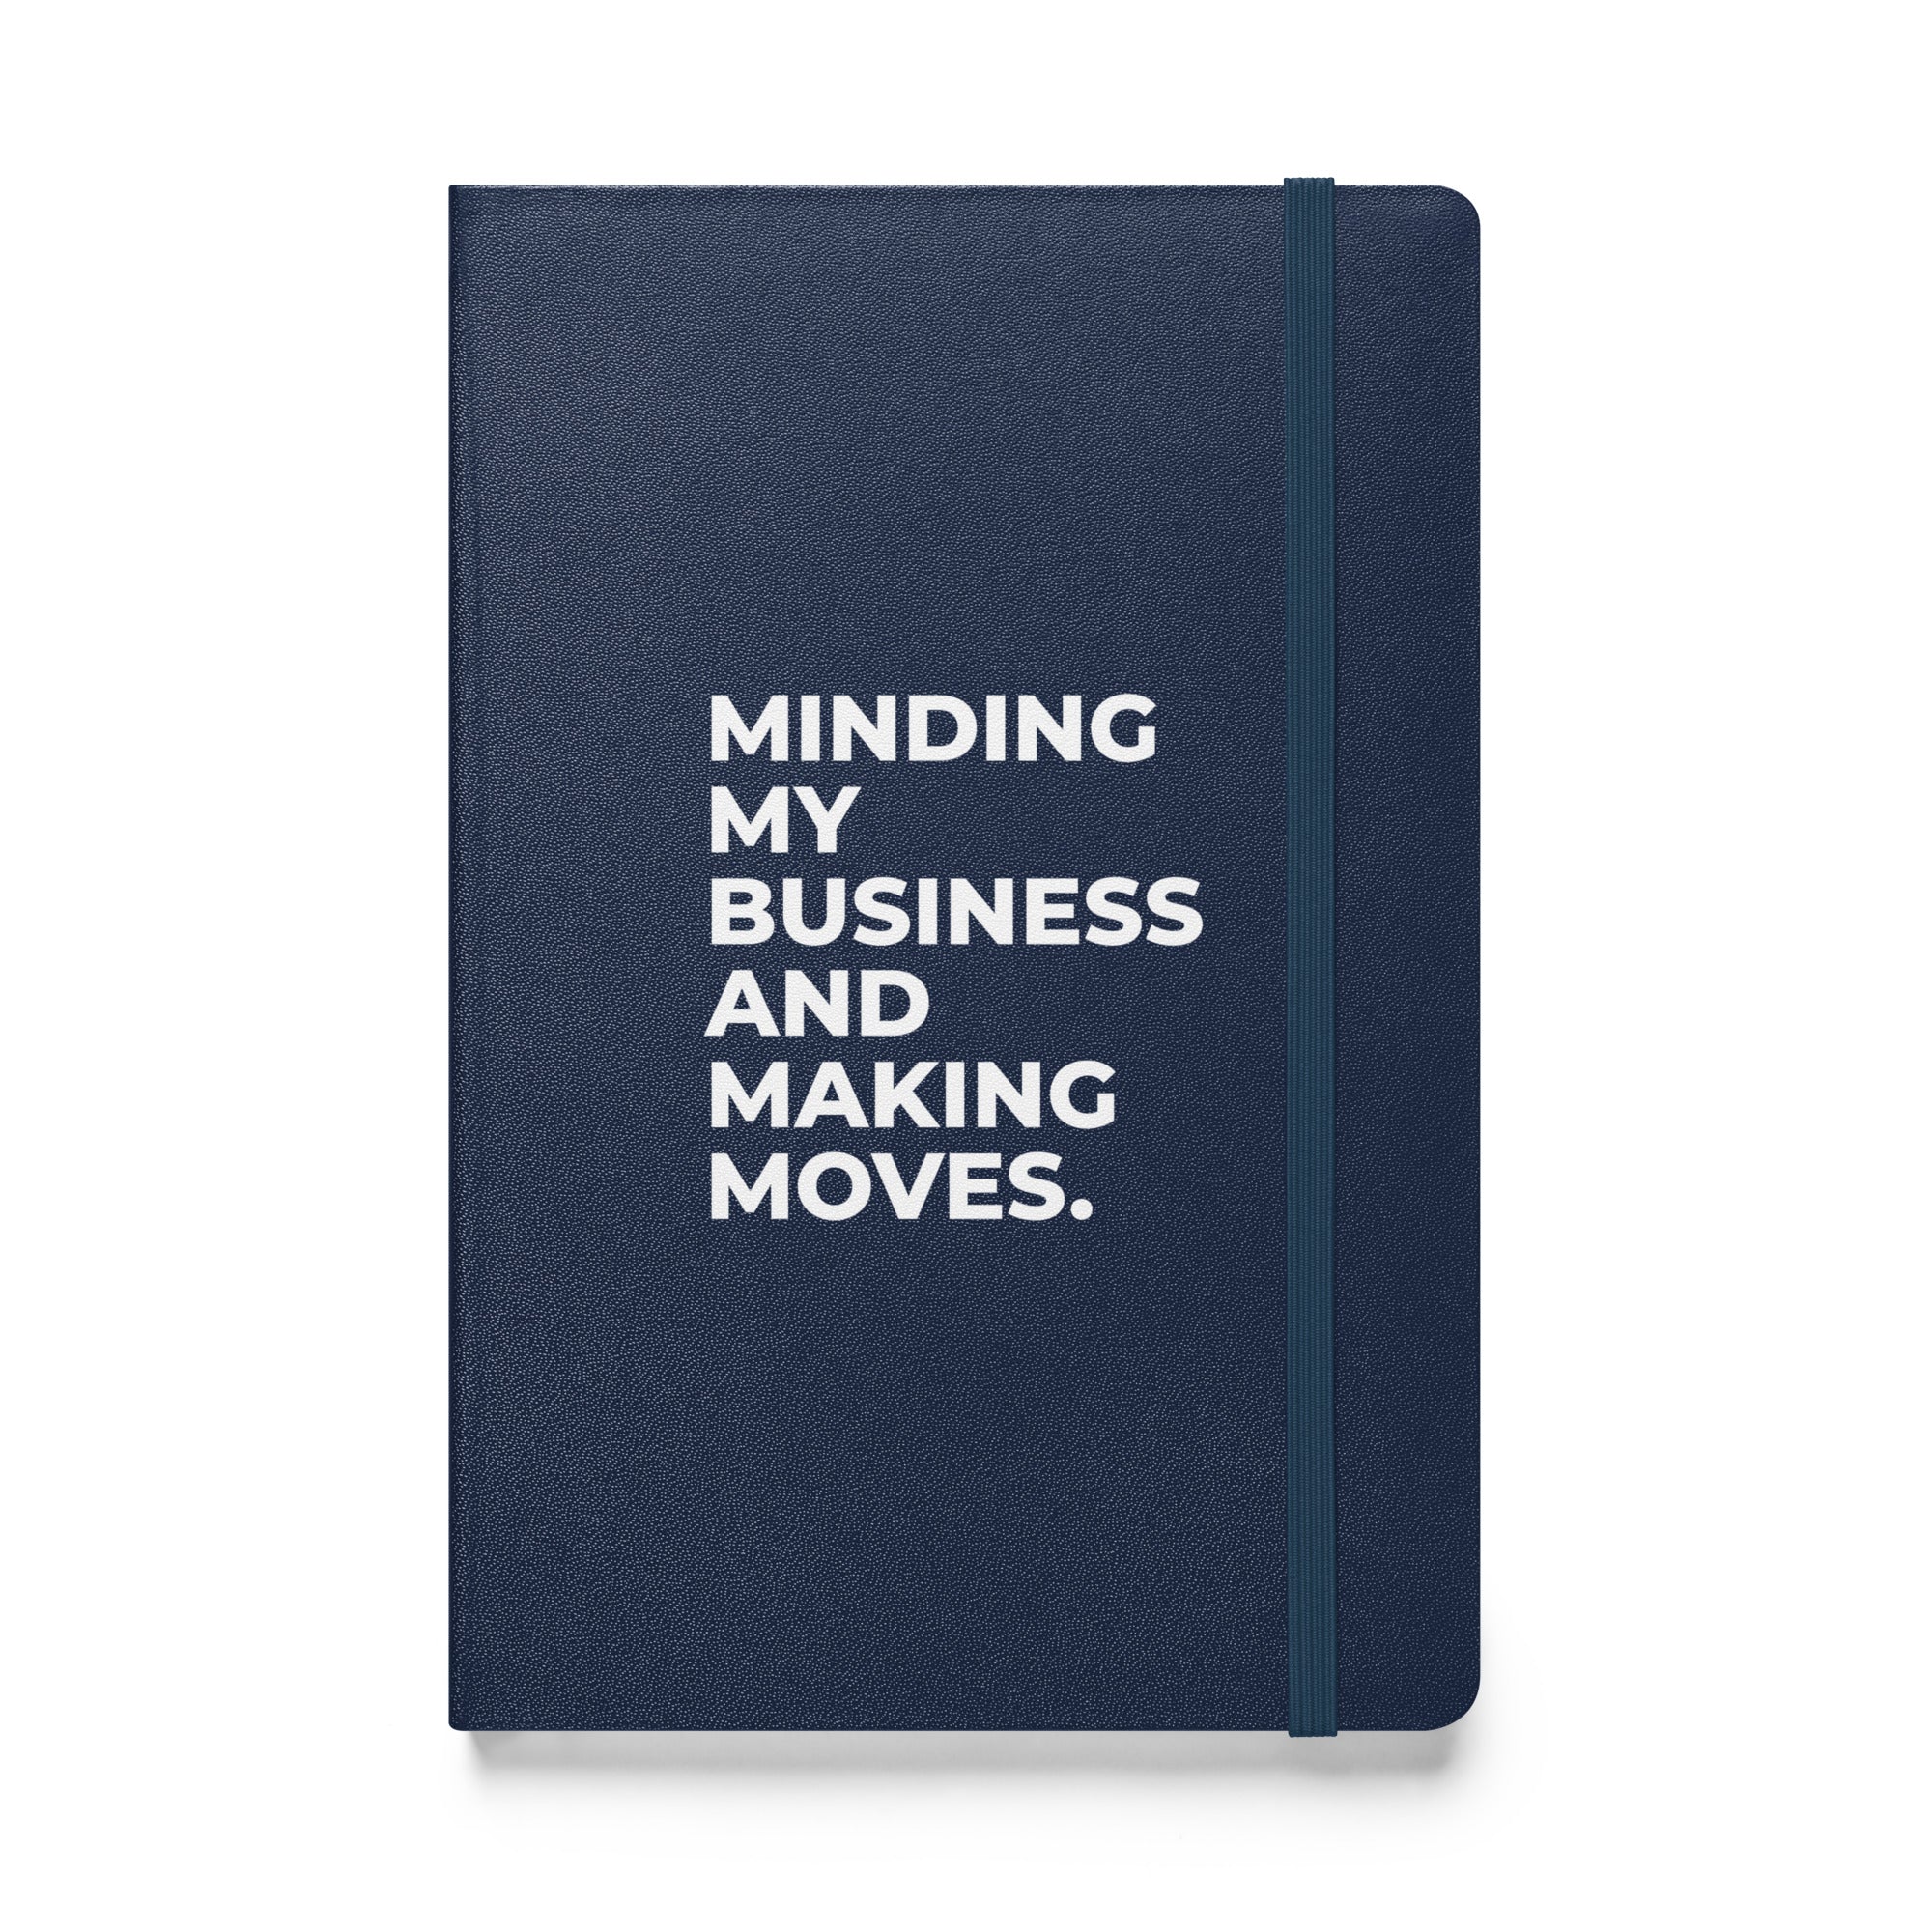 Minding My Business and Making Moves. Hardcover bound notebook - Nailah Renae